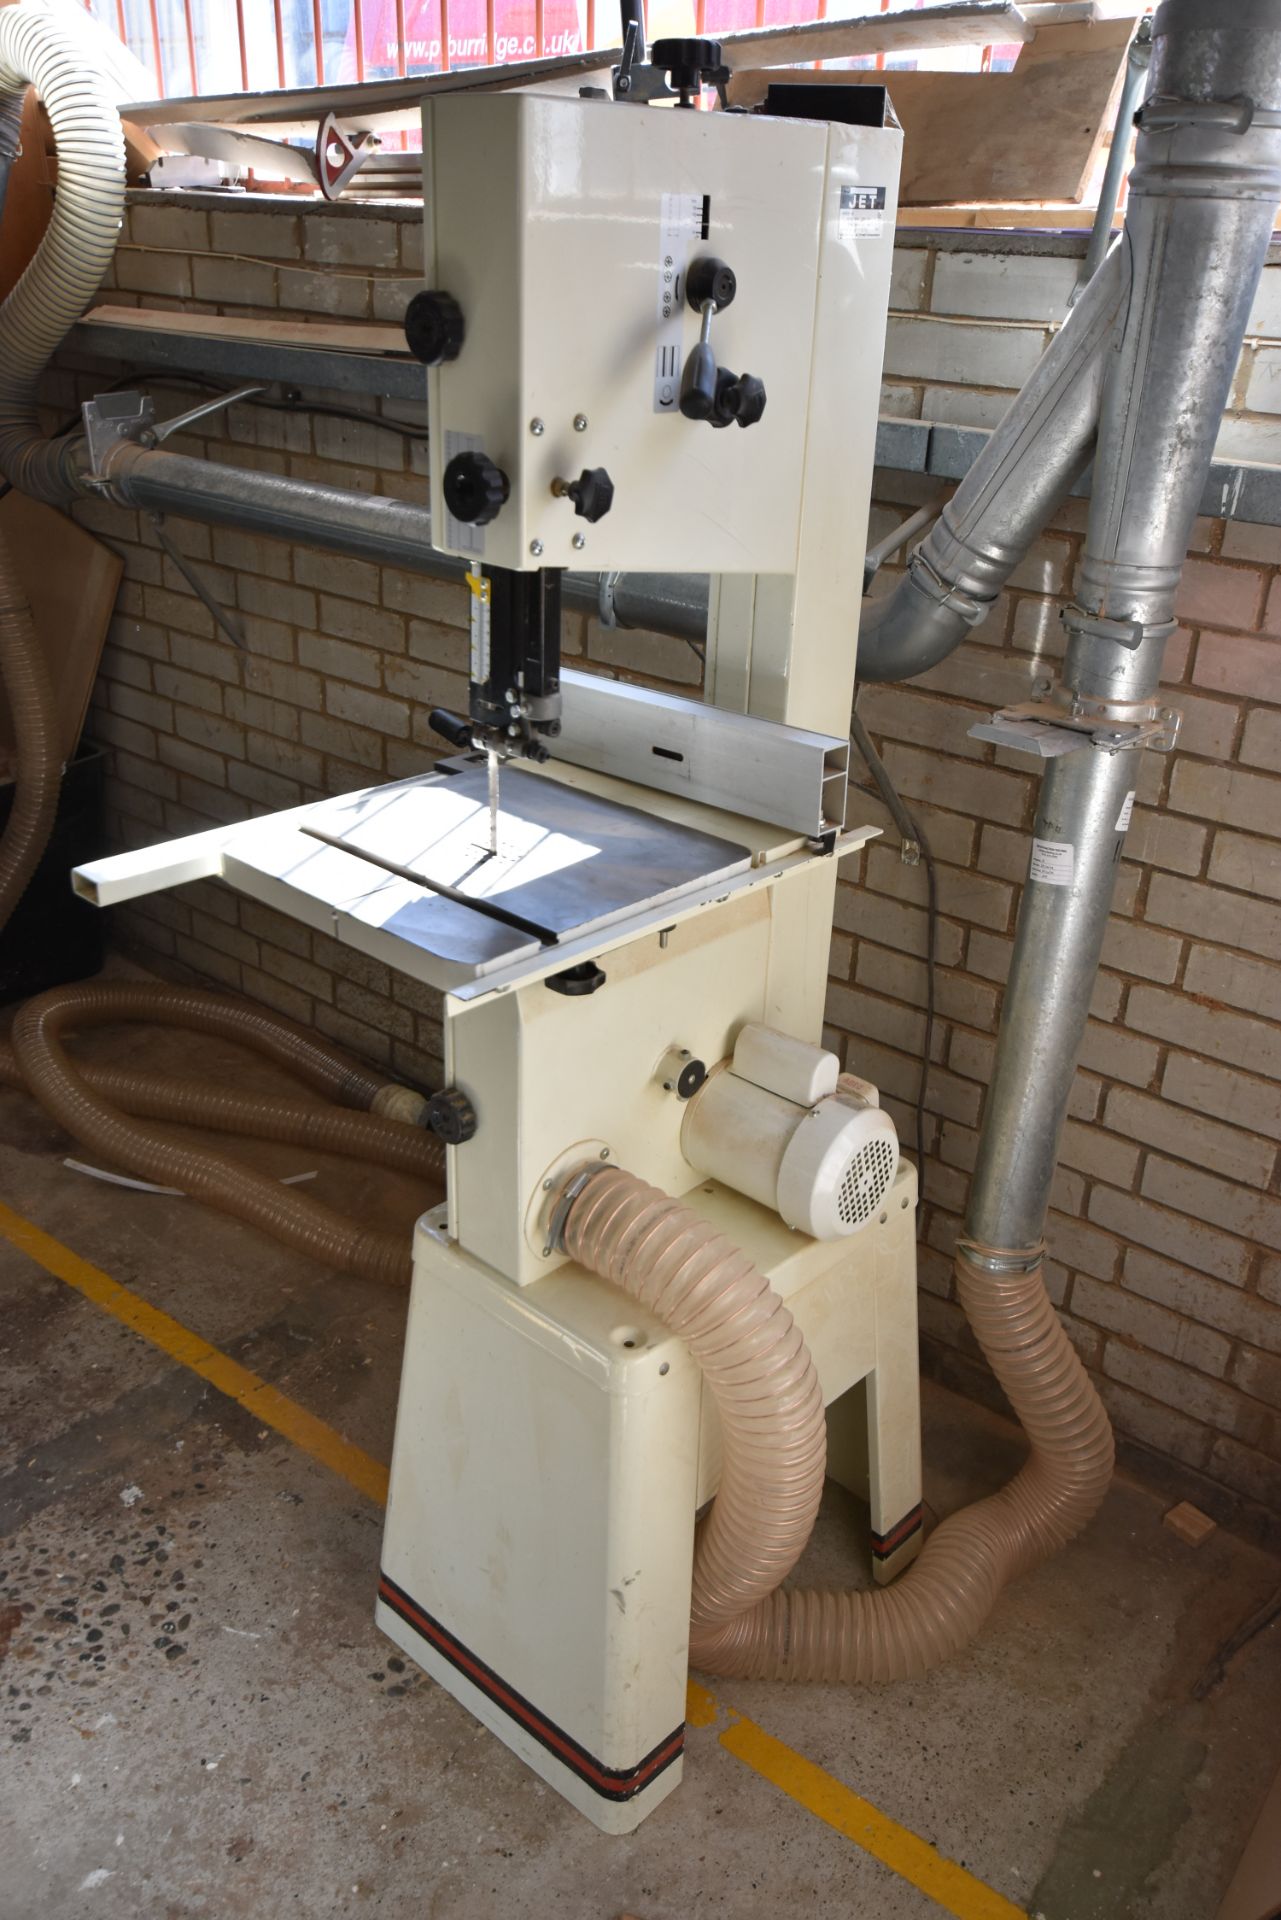 Jet JWBS-14 VERTICAL BANDSAW, serial no. 07110295, year of manufacture 2007, 230V, approx. 345mm - Image 2 of 3